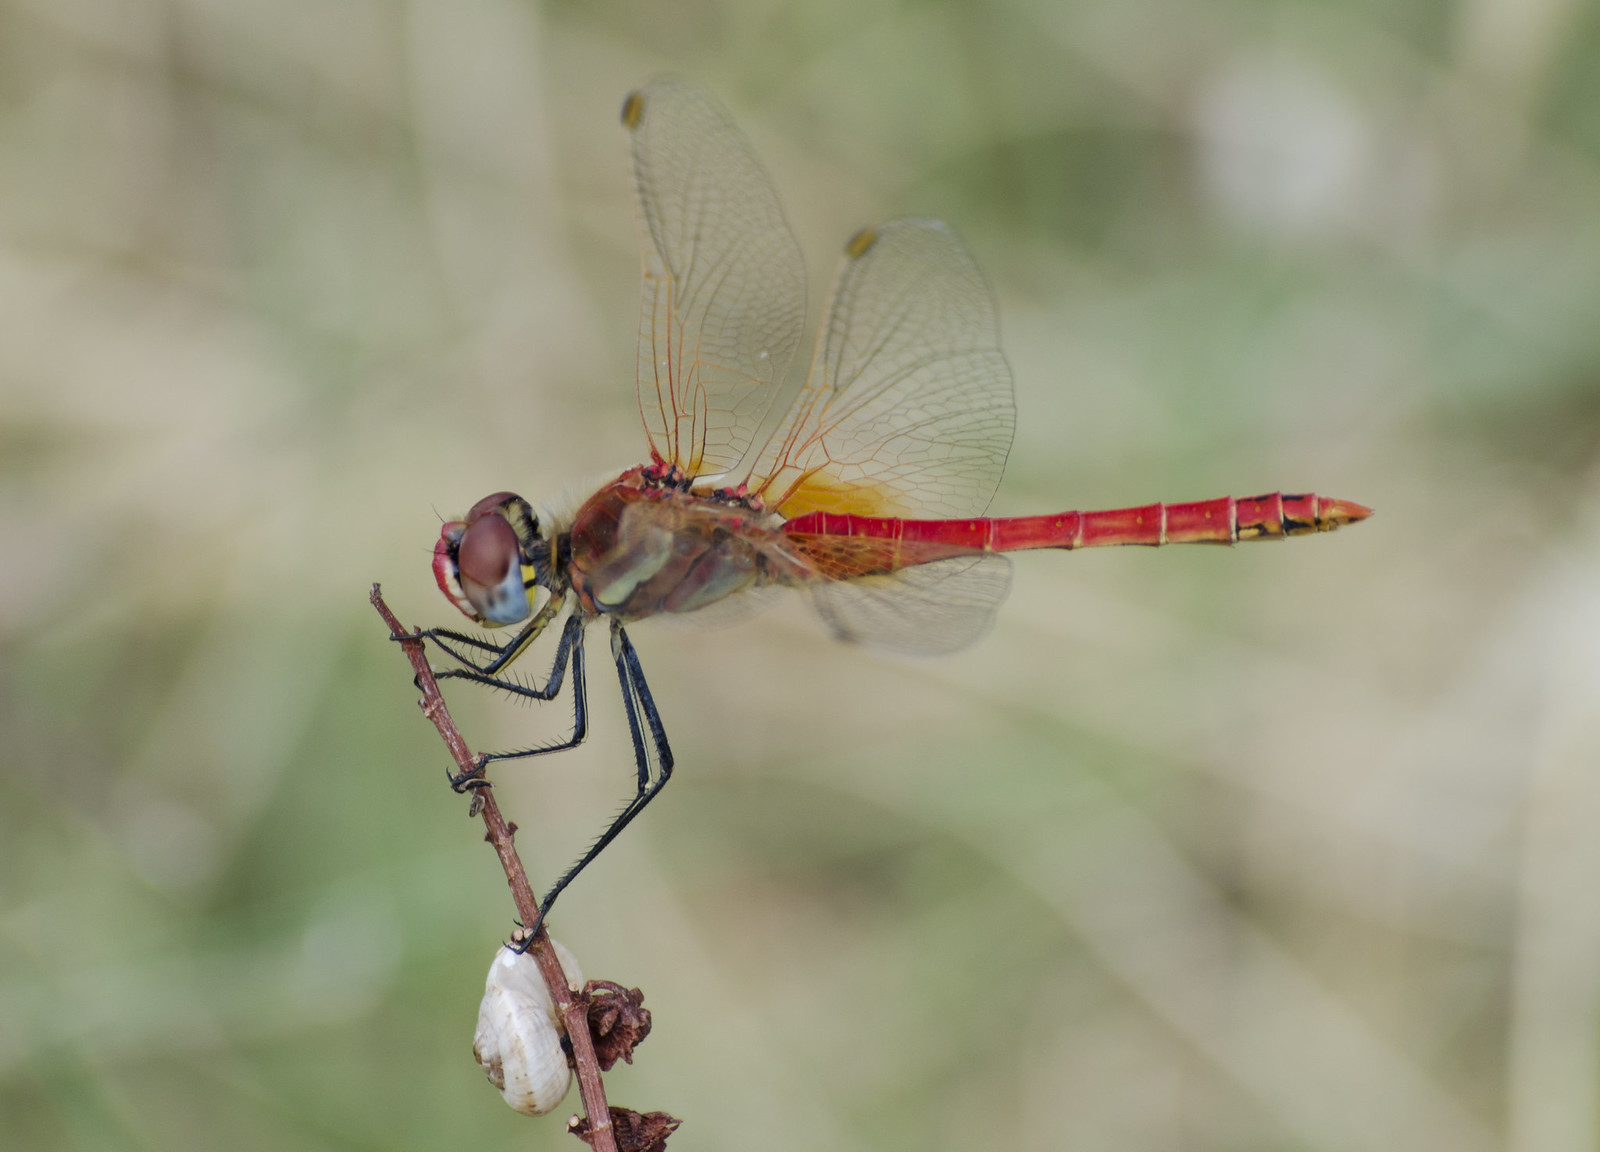 Dragonfly close-up*